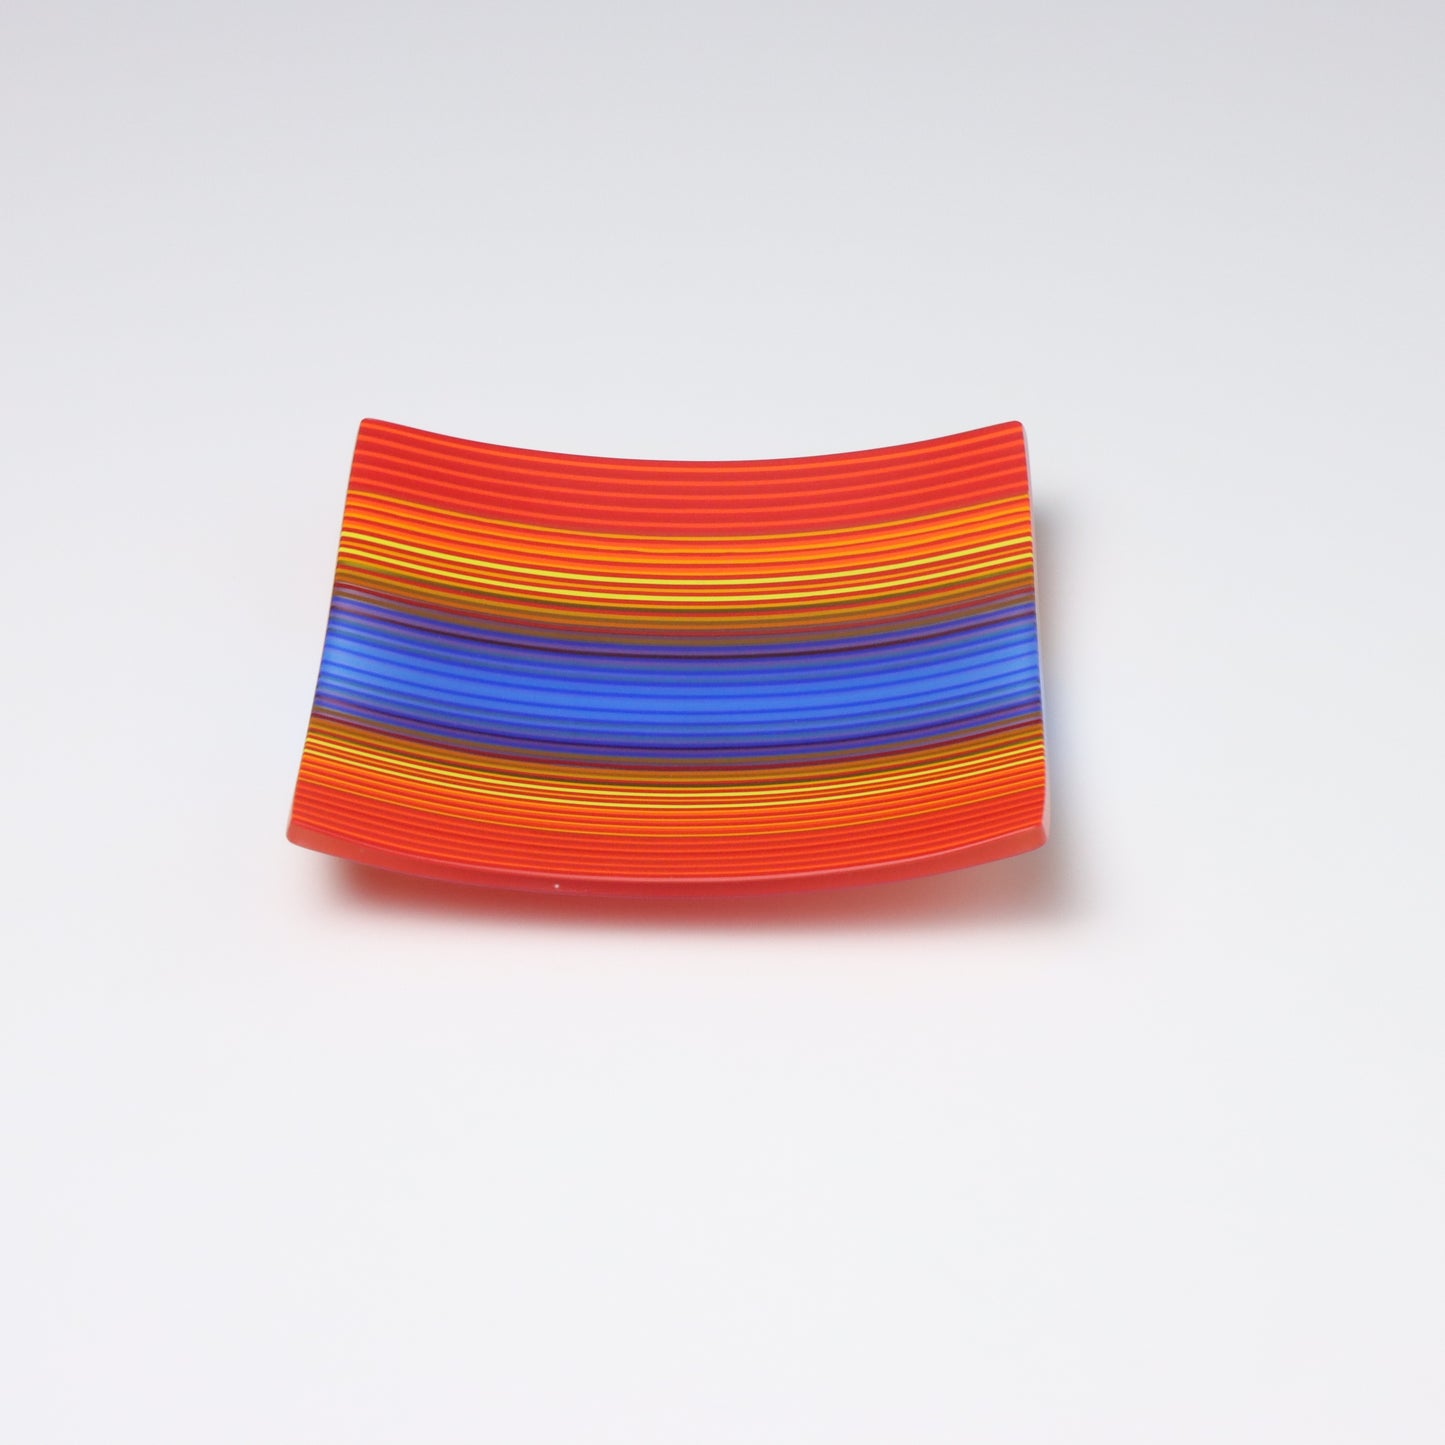 S3530 | Square Shaped ColourWave Glass Plate | Red, Orange and Bright Blue